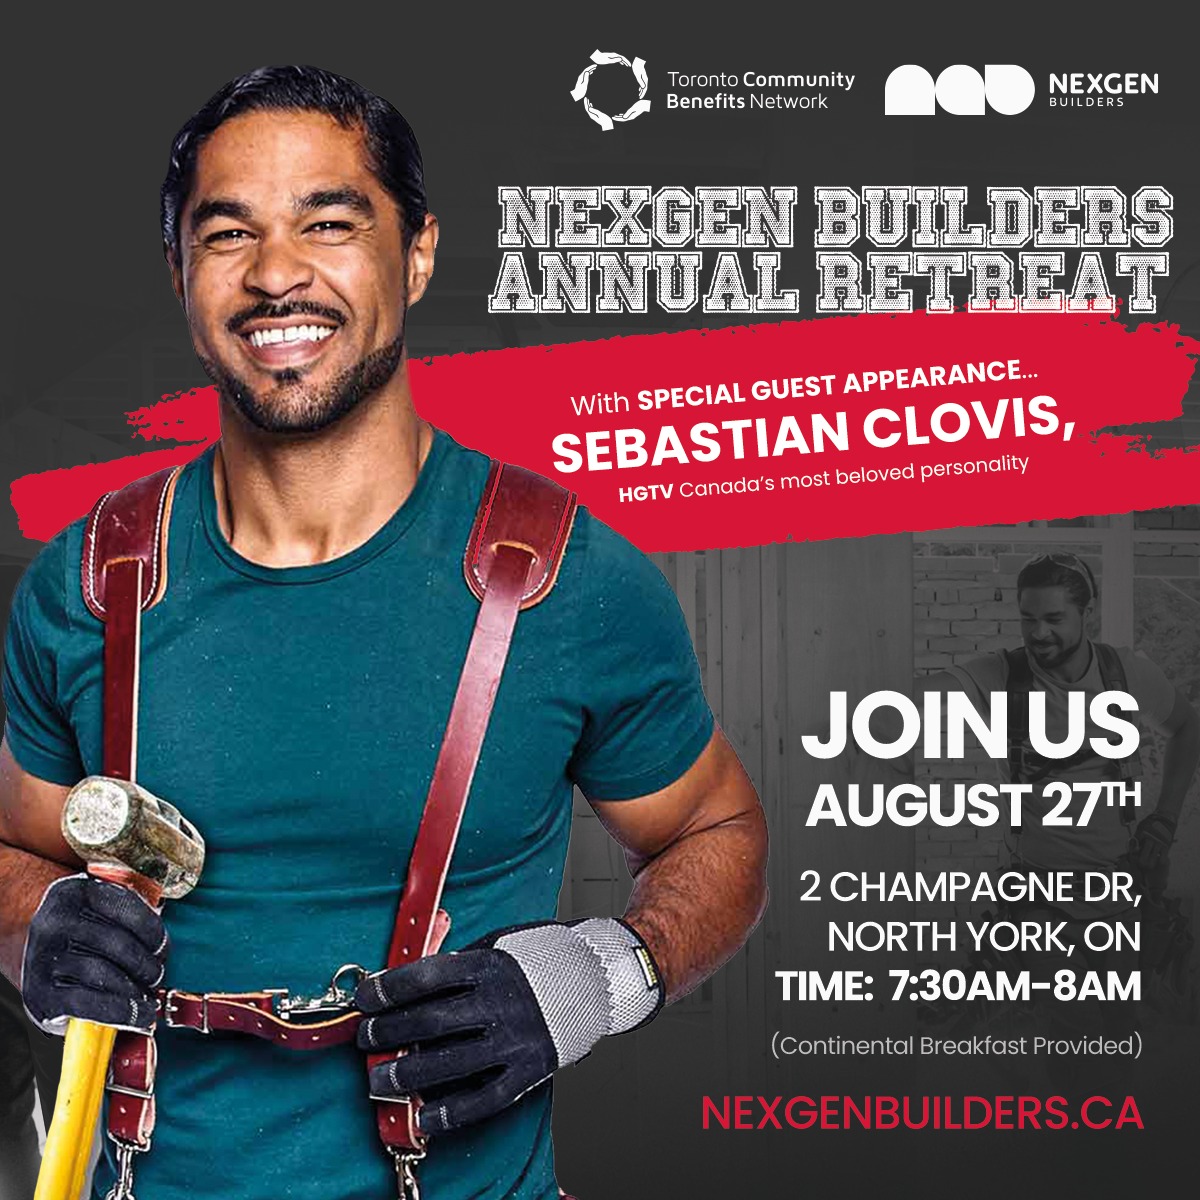 Join us for the NexGen Builders Annual Retreat this weekend for a special guest appearance from @hgtvcanada's most beloved personality @SebClovis. If you are a mentee, mentor or community partner, reach out to us at NexGen@communitybenefits.ca for your invite #nexgenbuilders